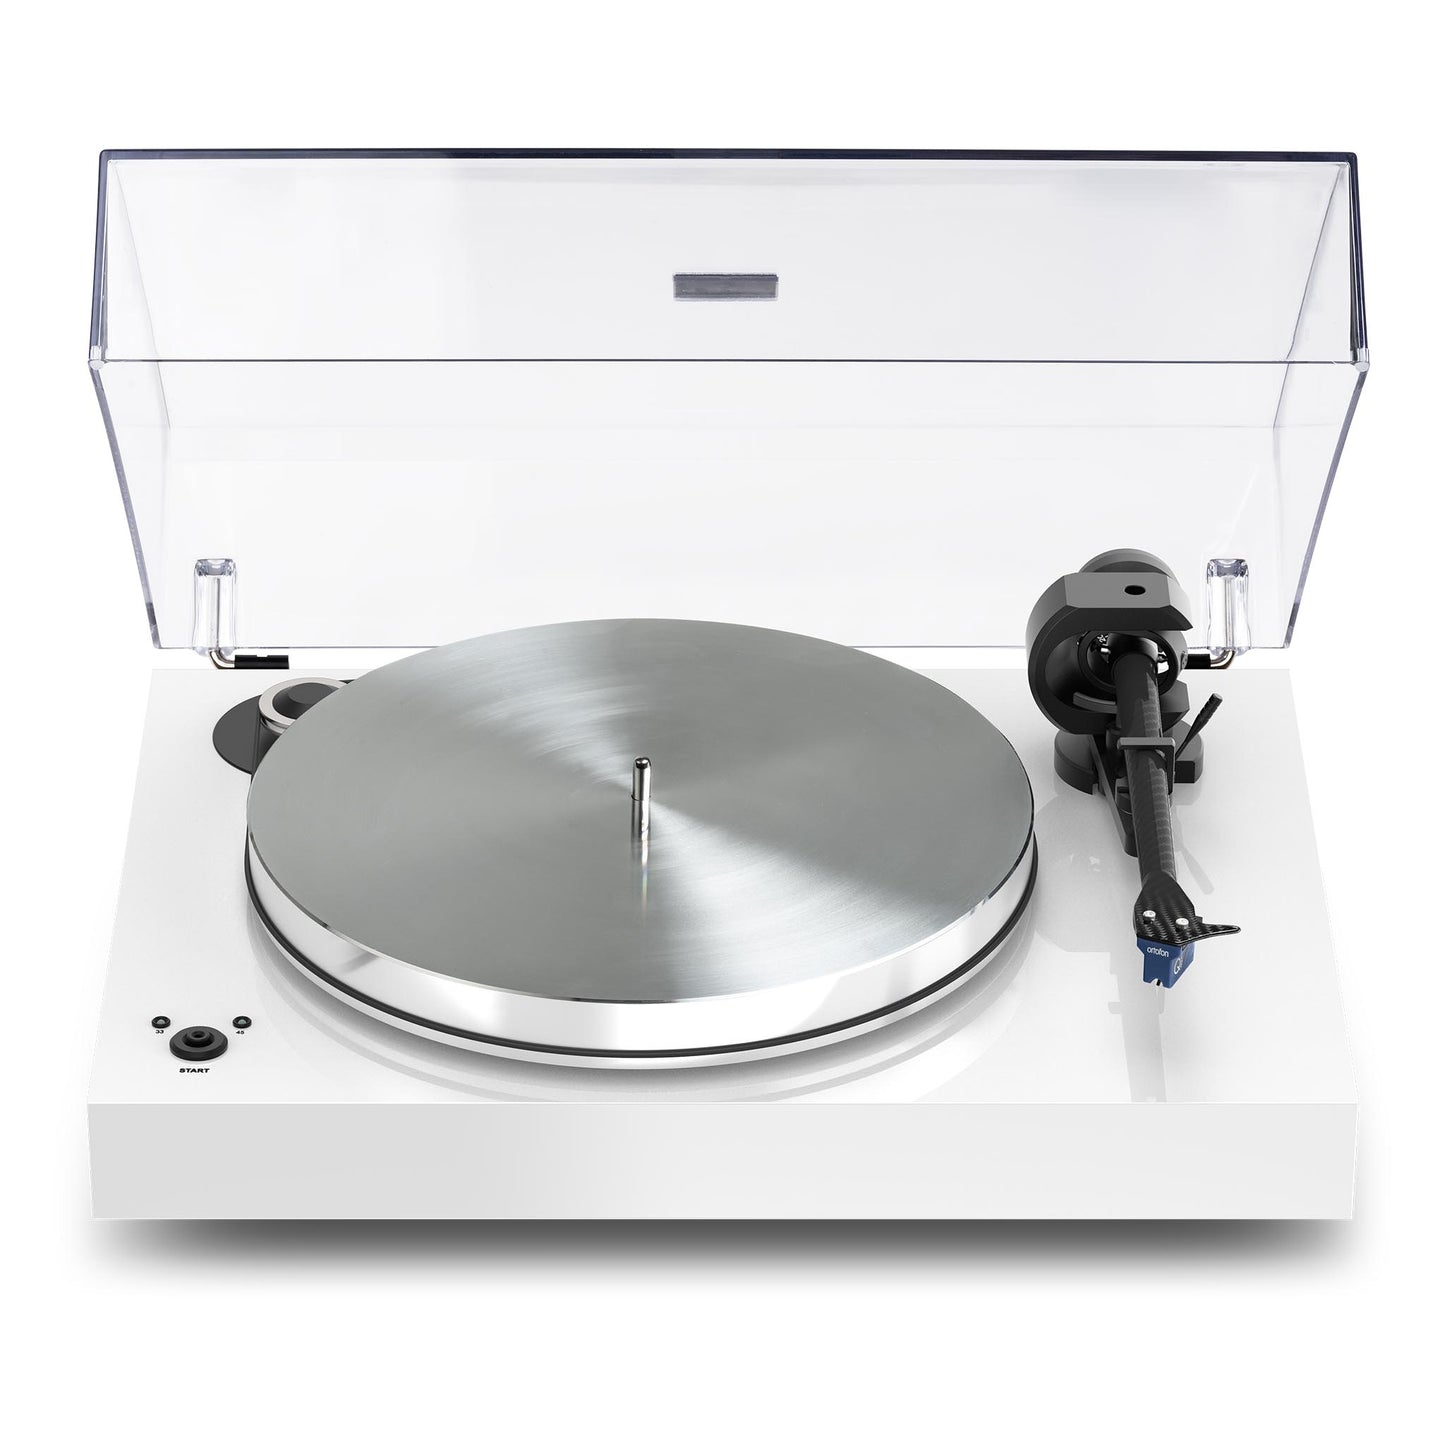 Pro-Ject X8 Evolution Turntable